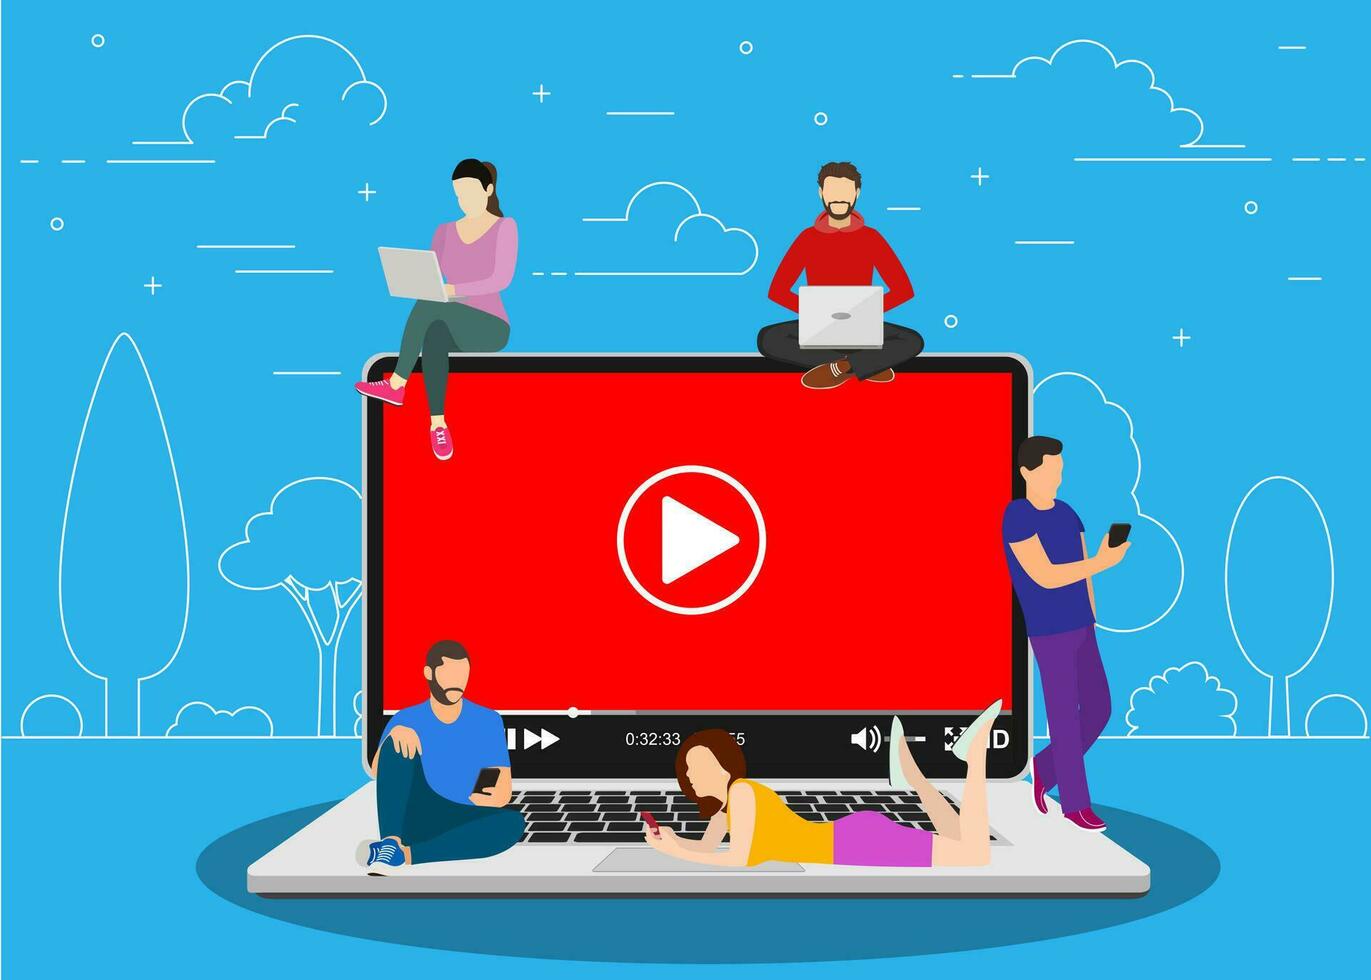 Video concept. people using mobile gadgets, tablet pc and smartphone for live watching a video via internet. Vector illustration in flat style